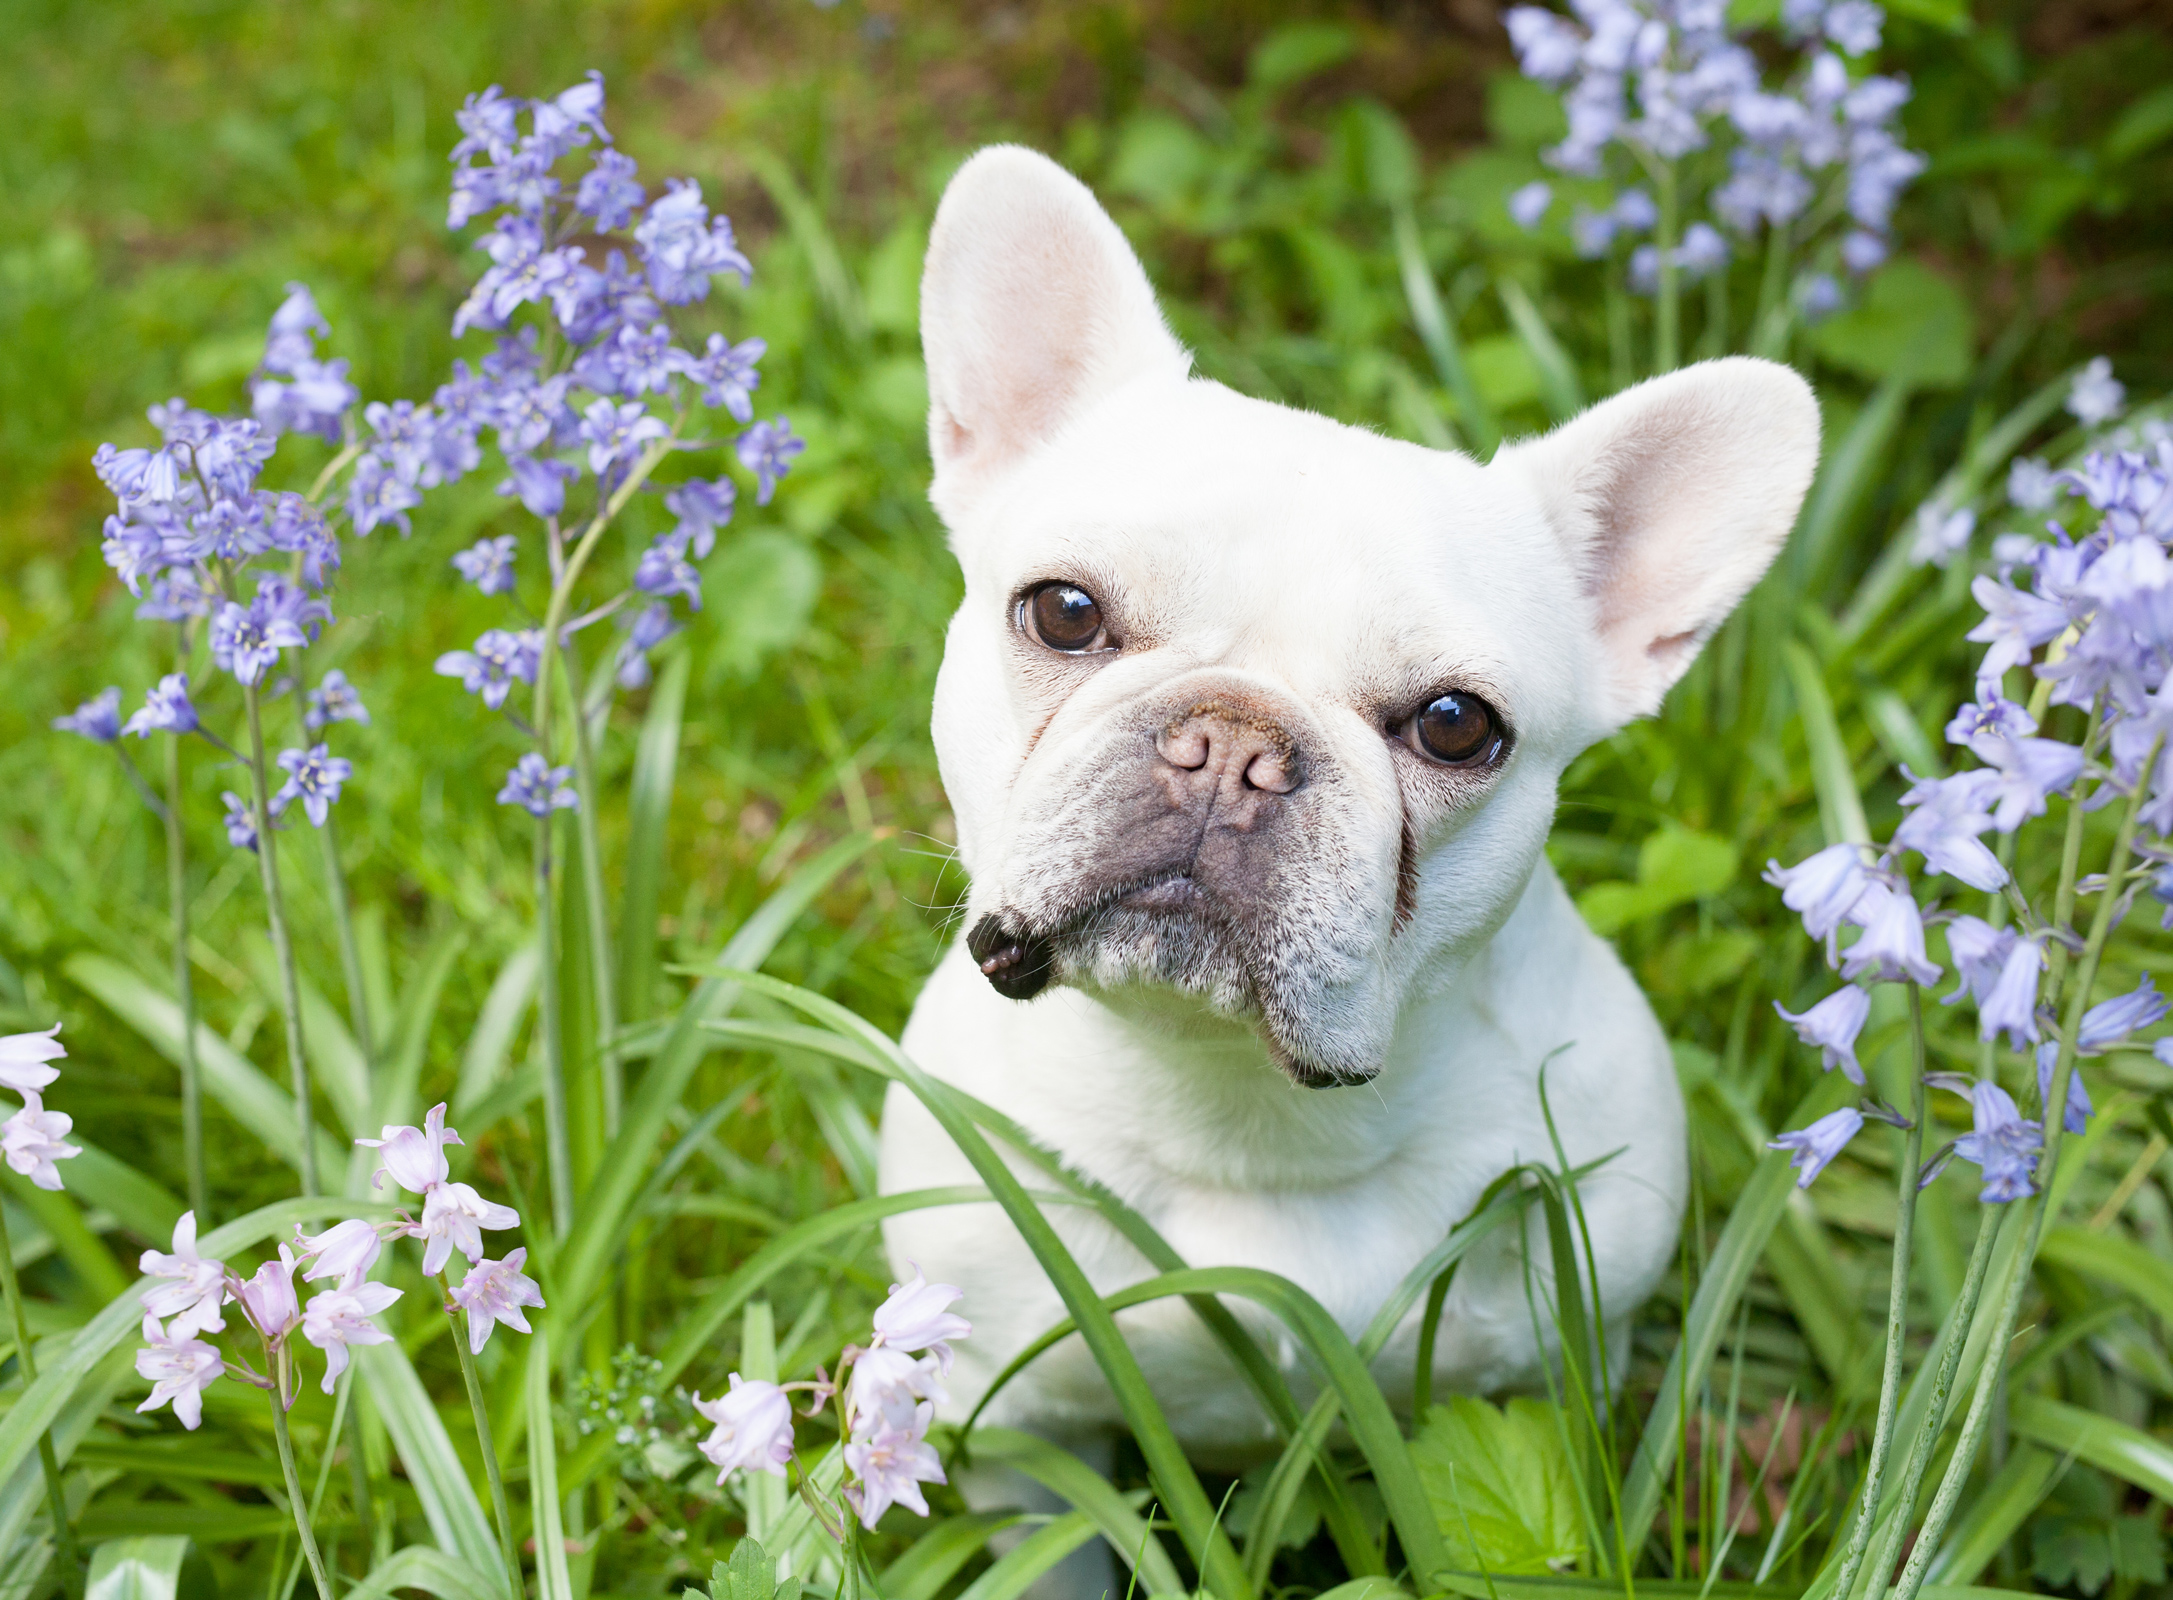 Cute white french bulldog photo sitting in a field of purple flowers